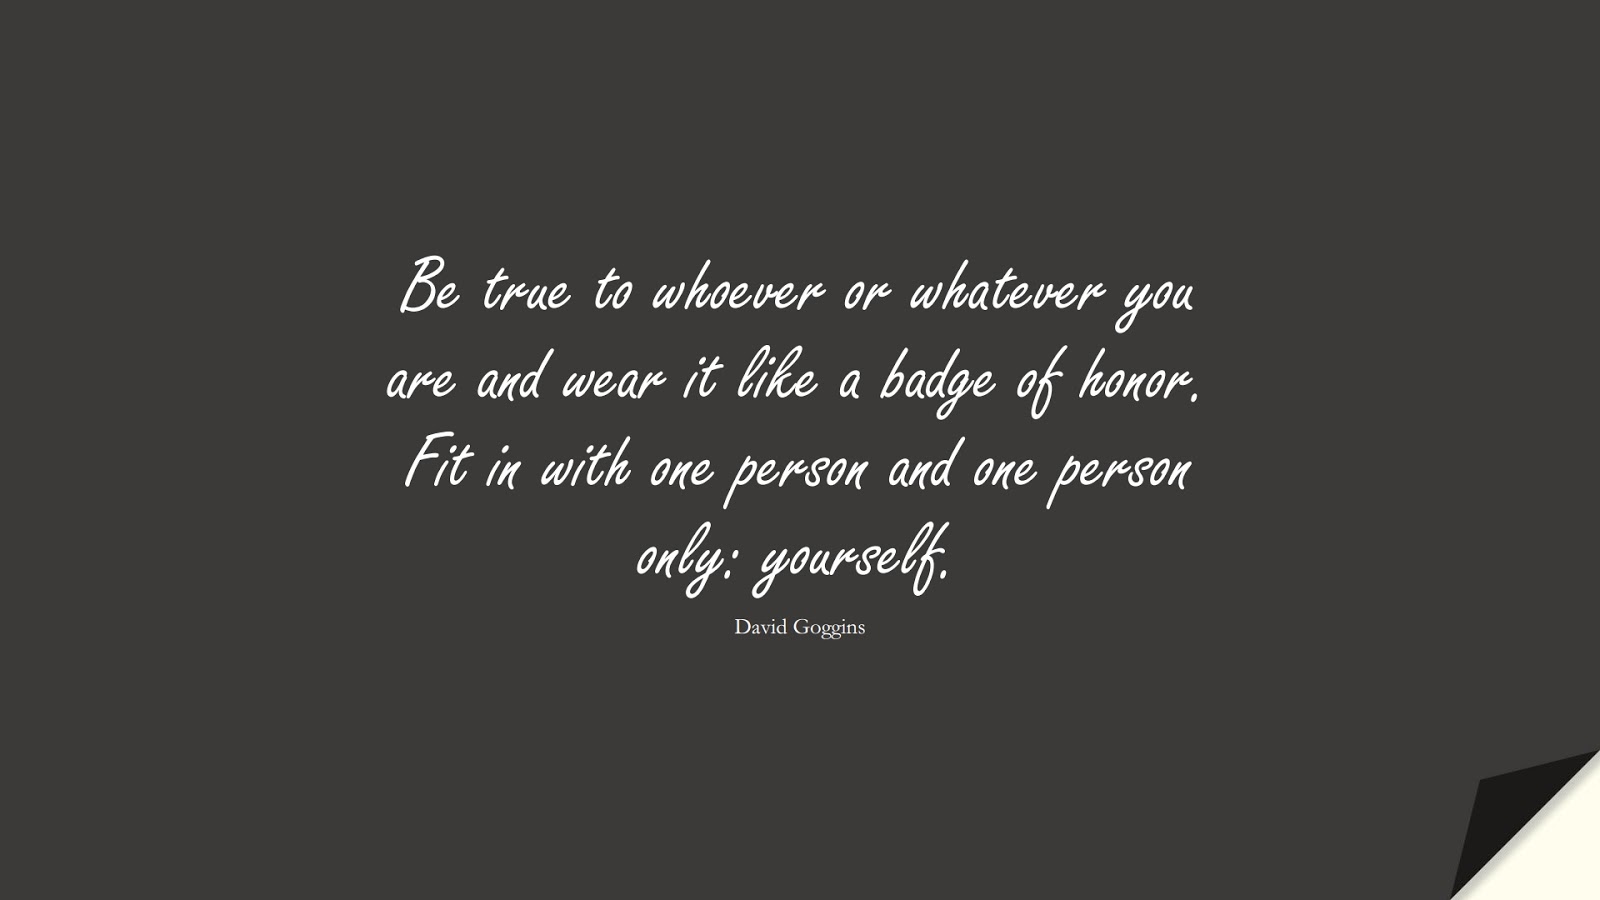 Be true to whoever or whatever you are and wear it like a badge of honor. Fit in with one person and one person only: yourself. (David Goggins);  #StoicQuotes